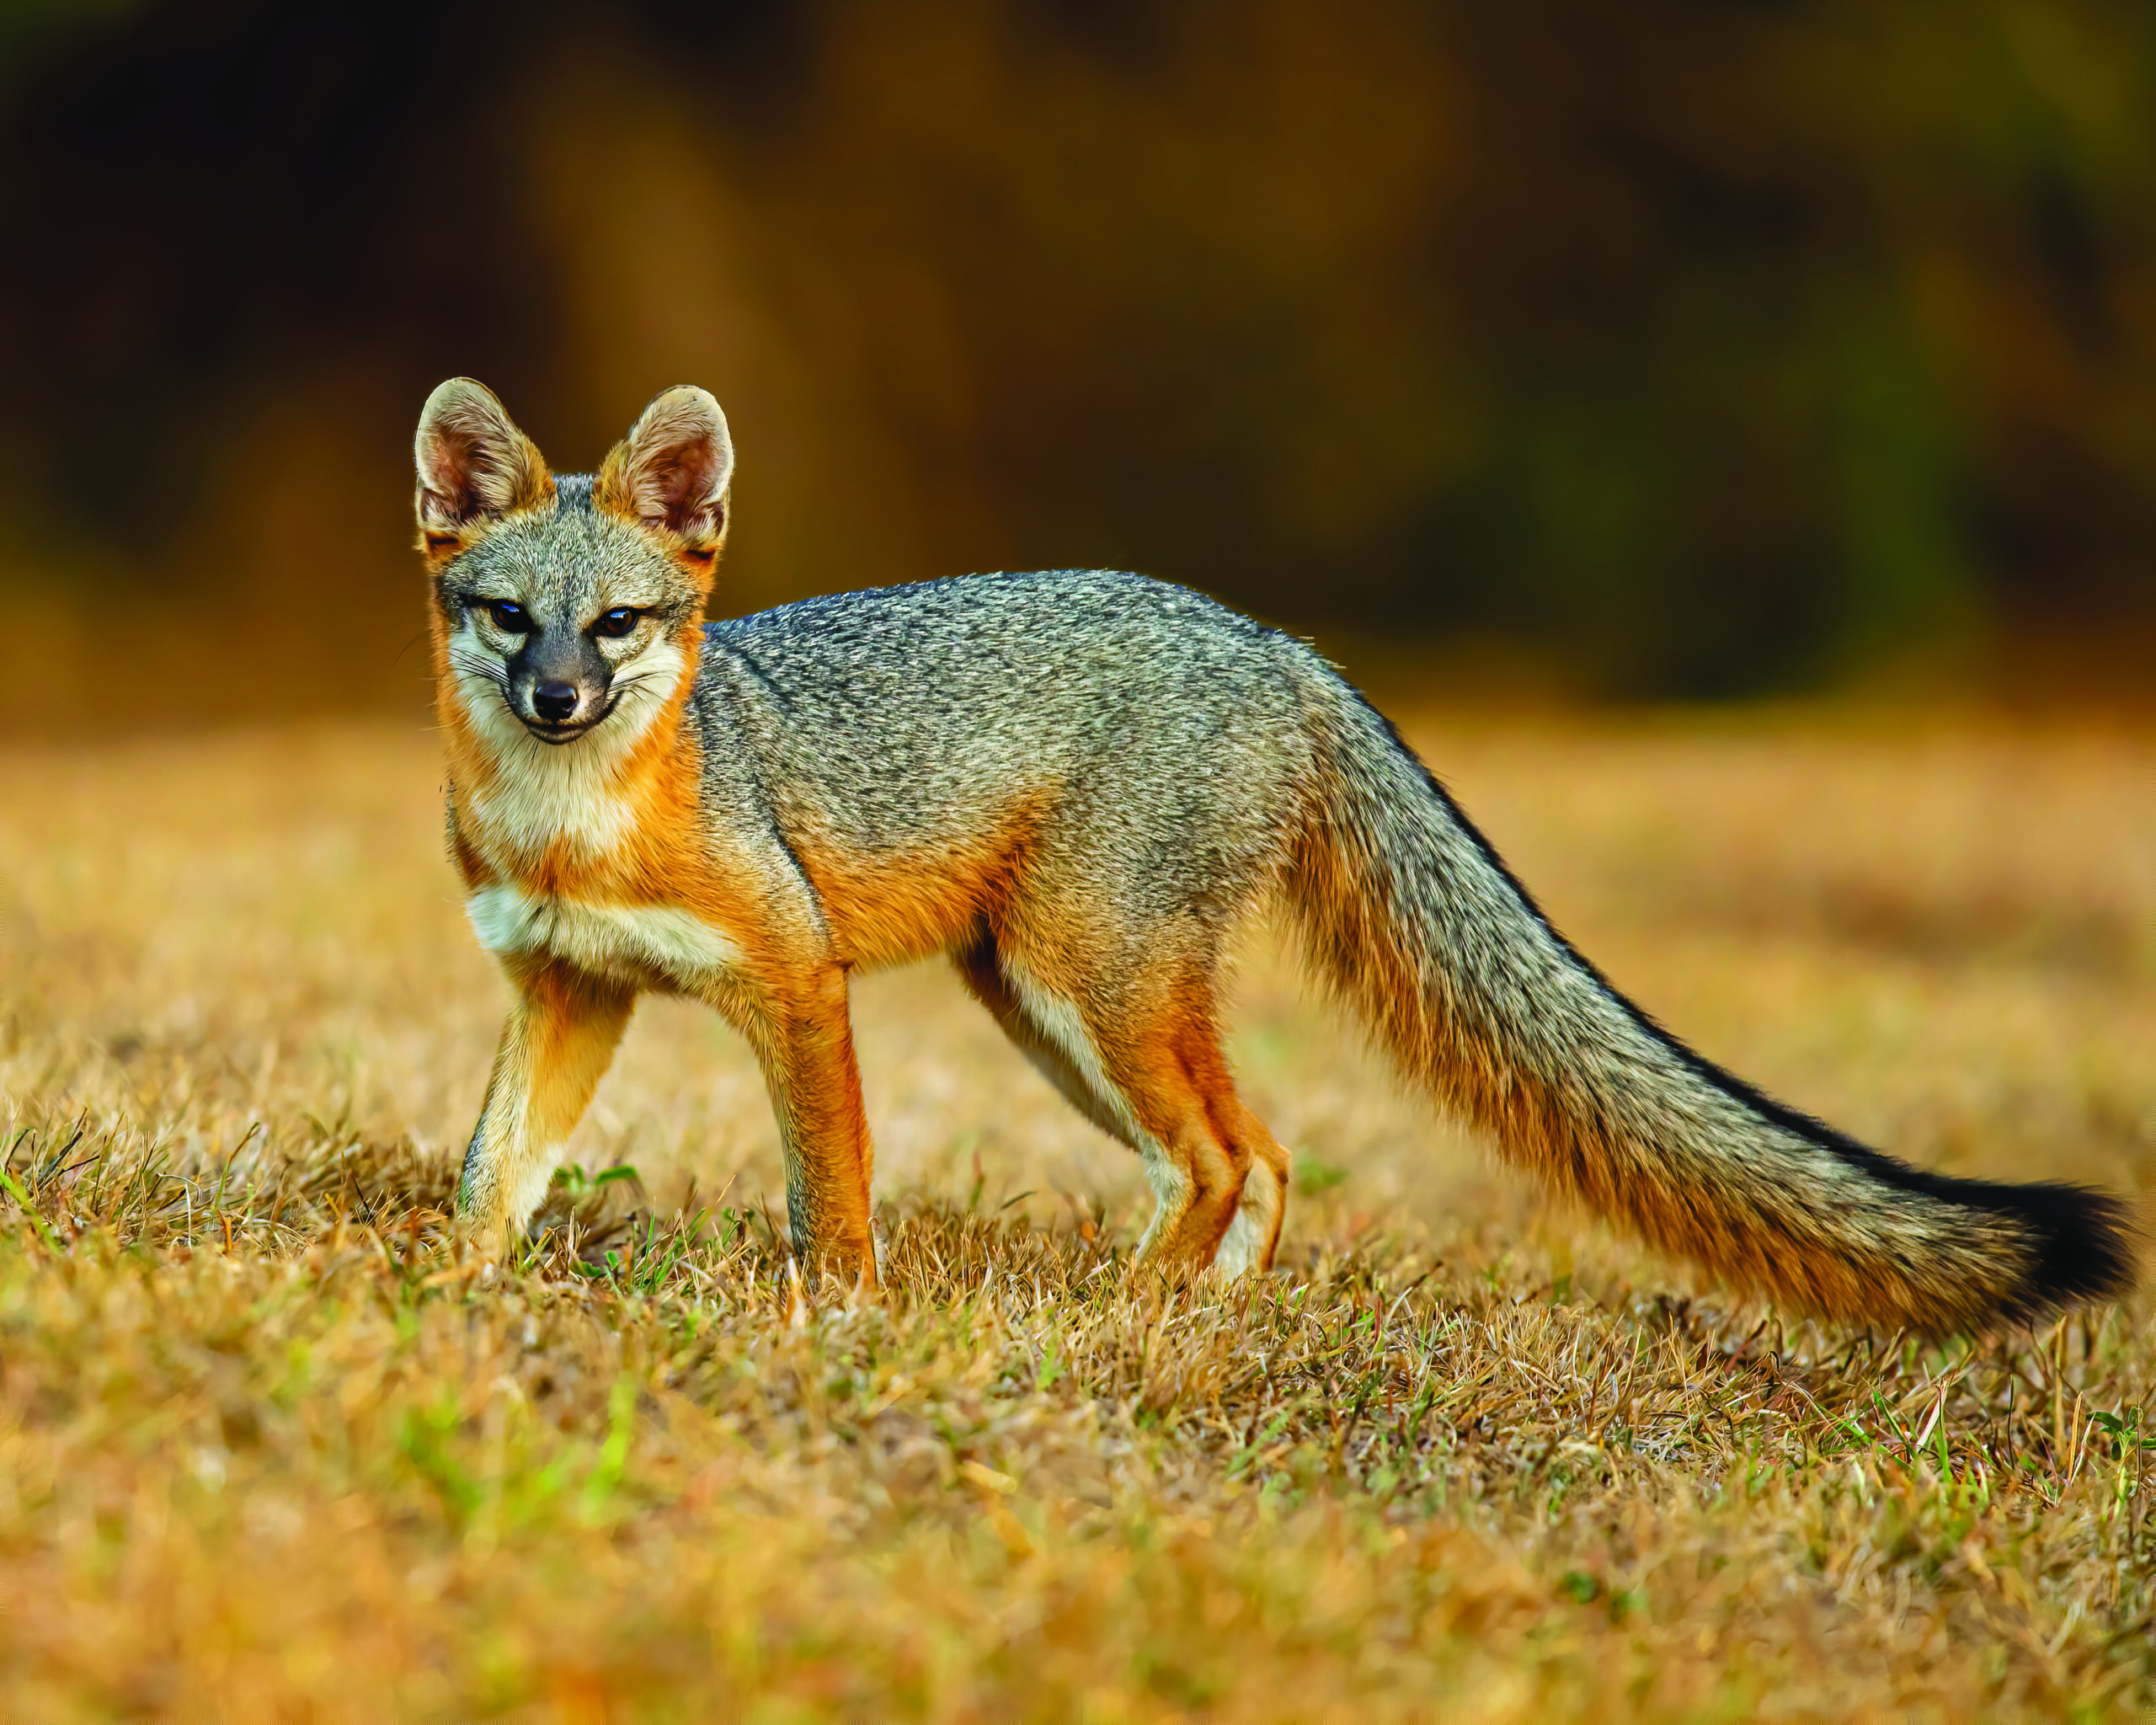 Gray Fox hunts for next meal on a dry grassy landscape.